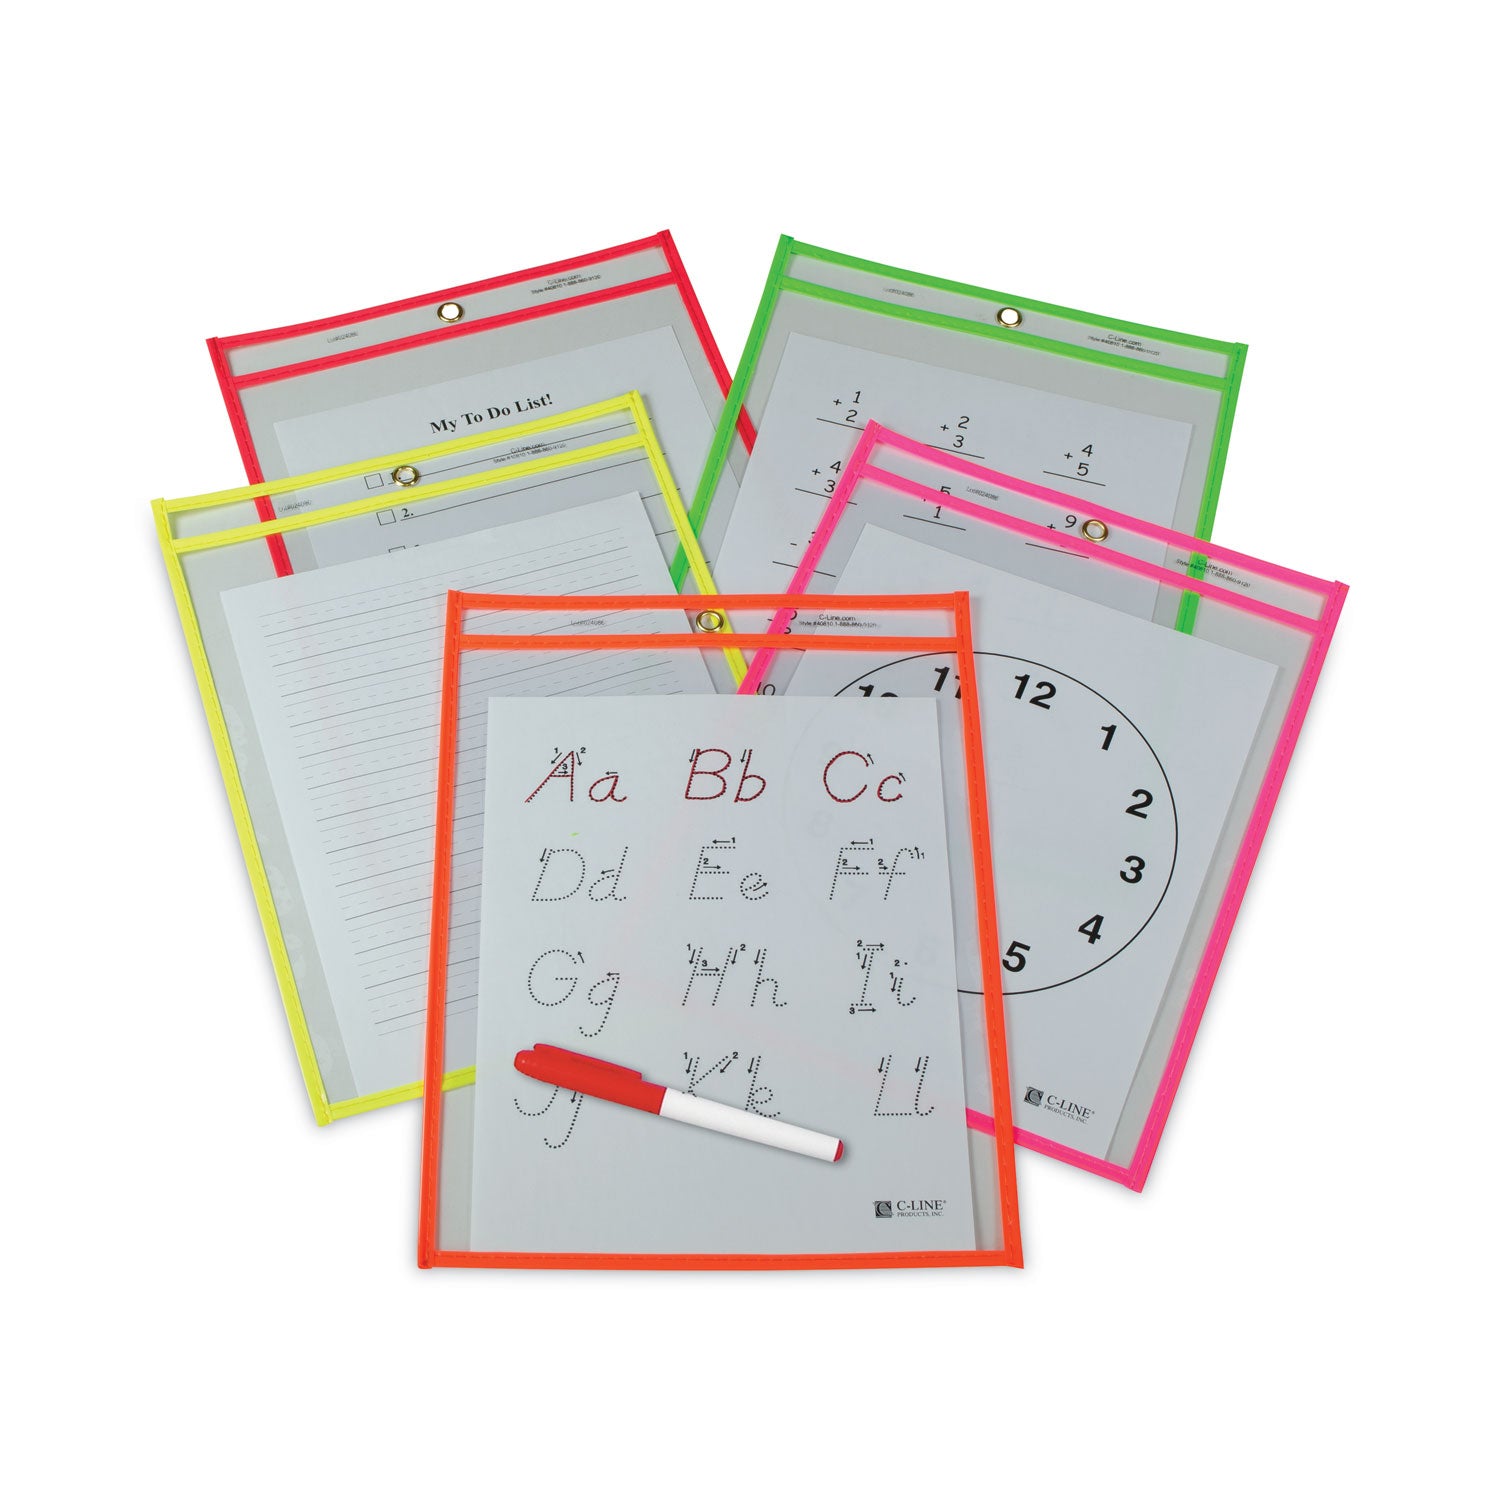 Reusable Dry Erase Pockets, 9 x 12, Assorted Neon Colors, 25/Box - 